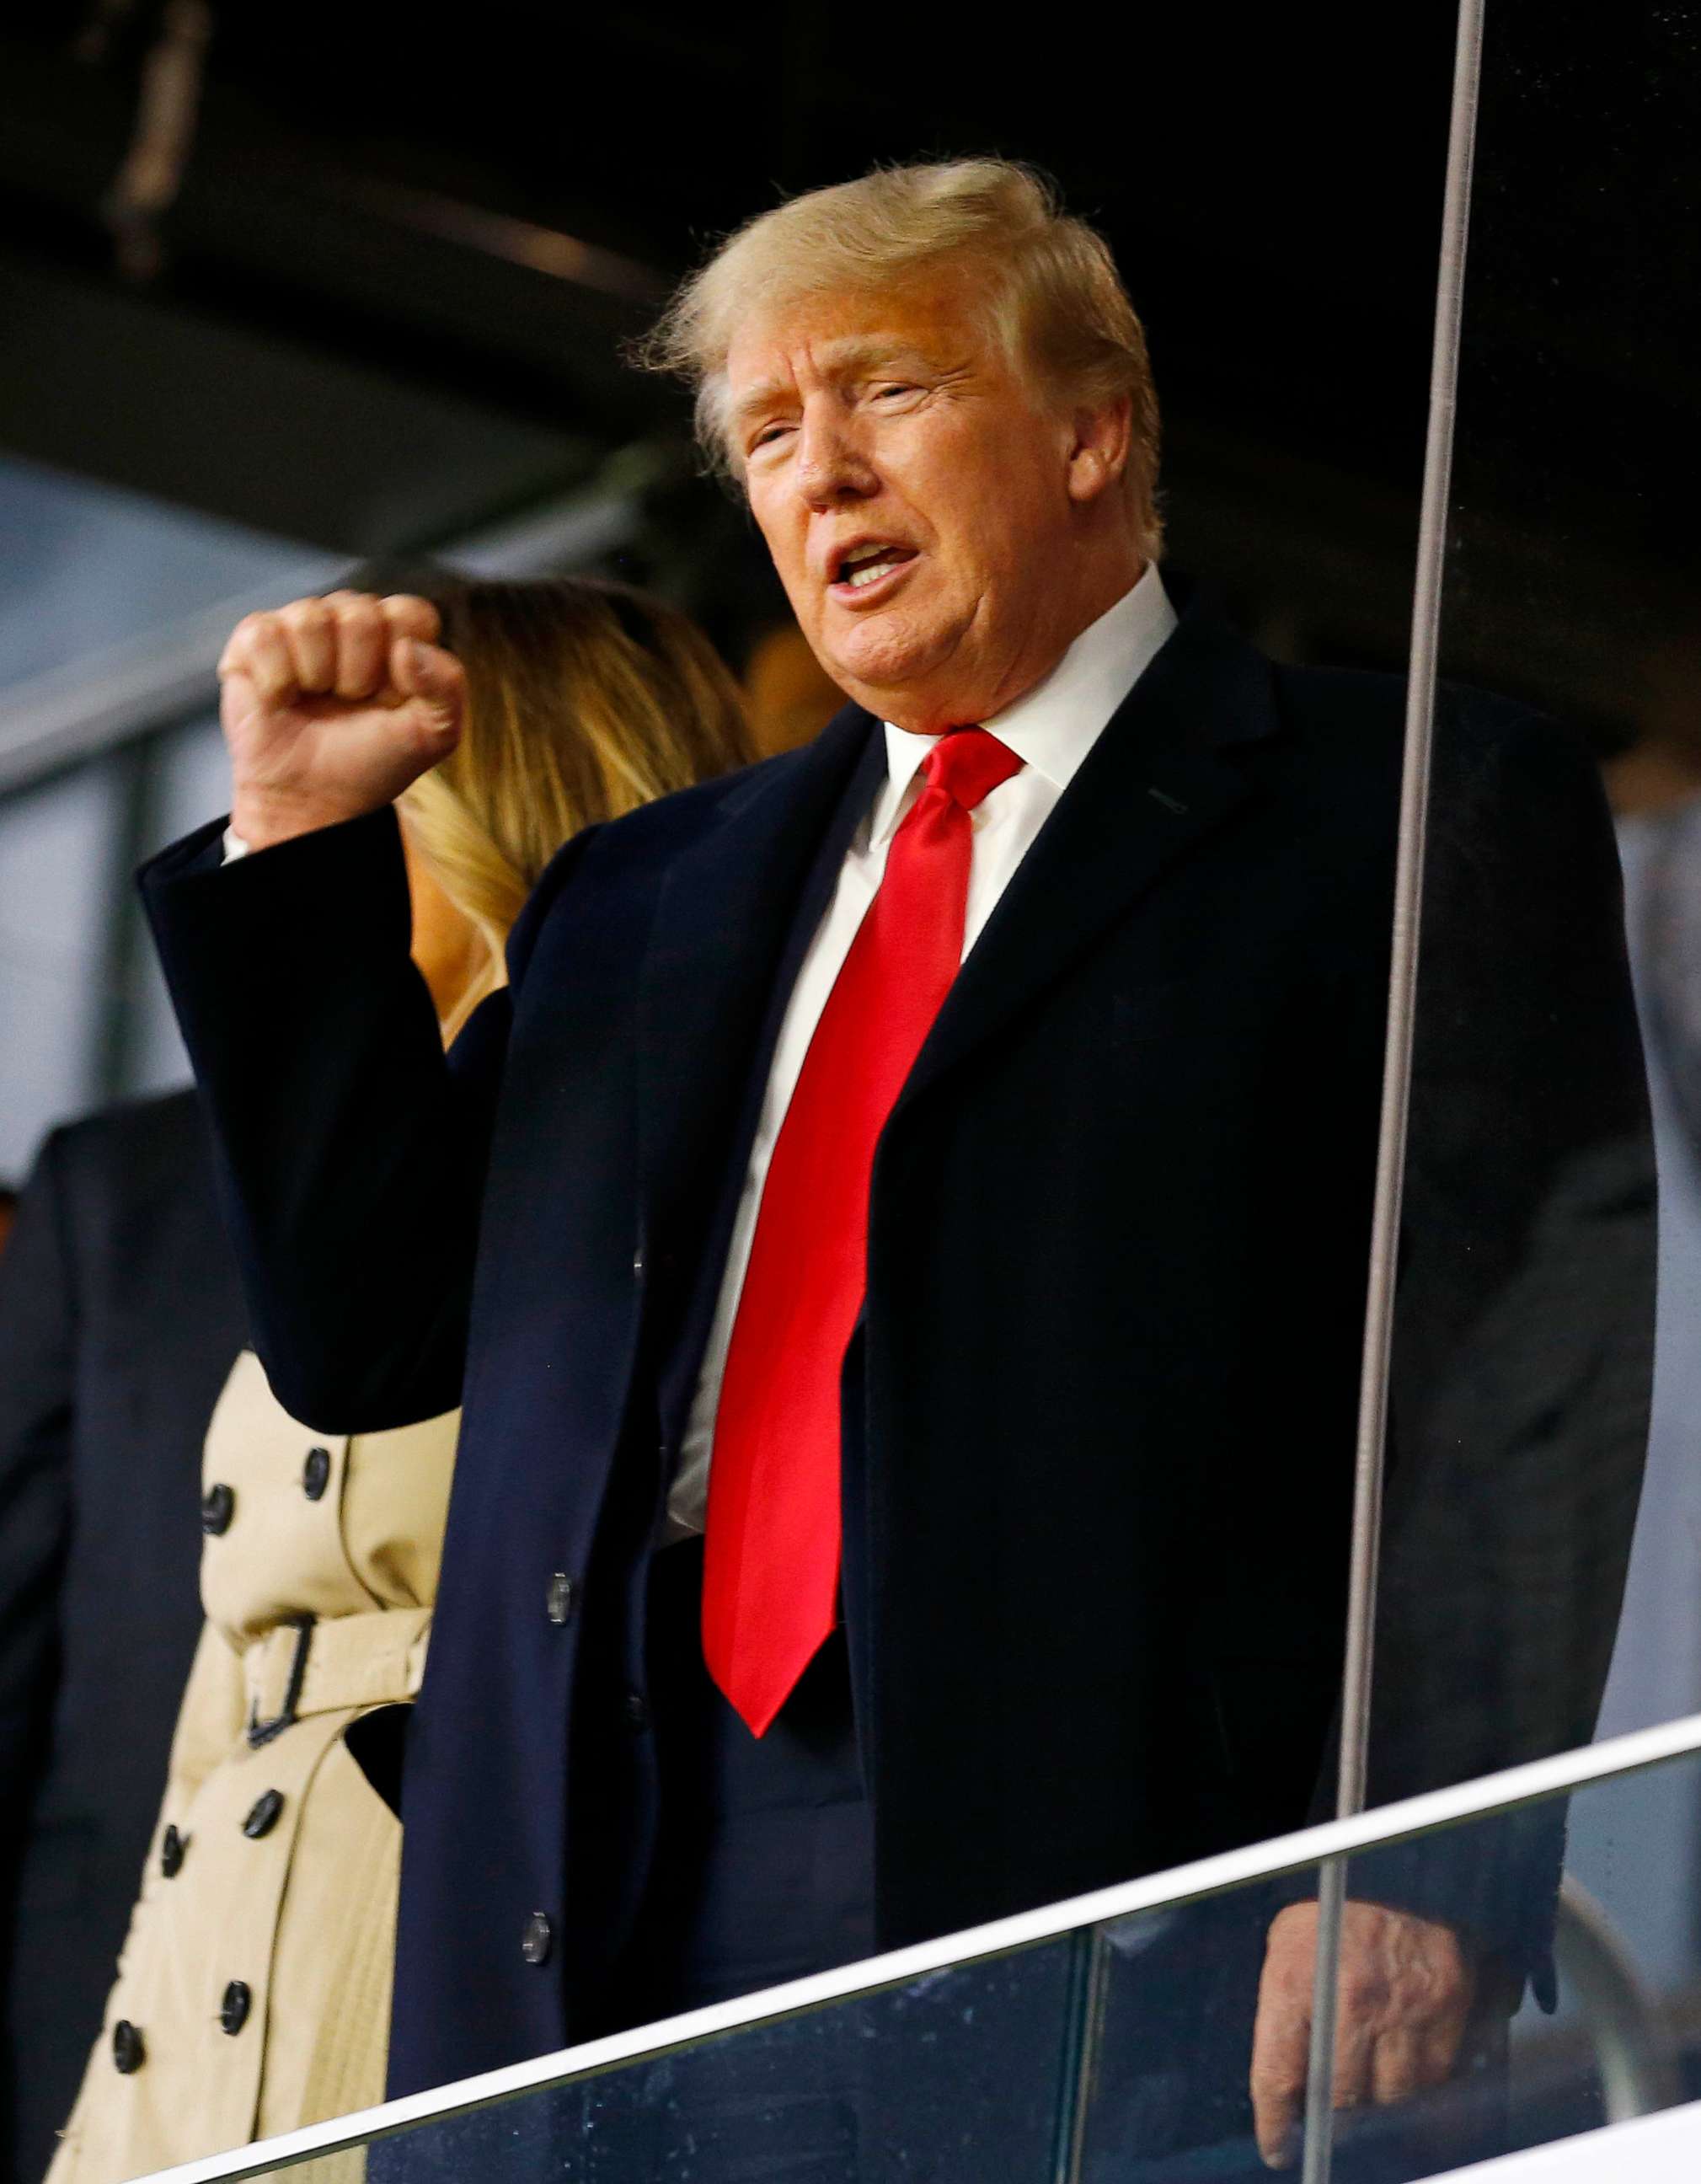 PHOTO: Former president of the United States Donald Trump attends a game in Atlanta, Oct. 30, 2021.